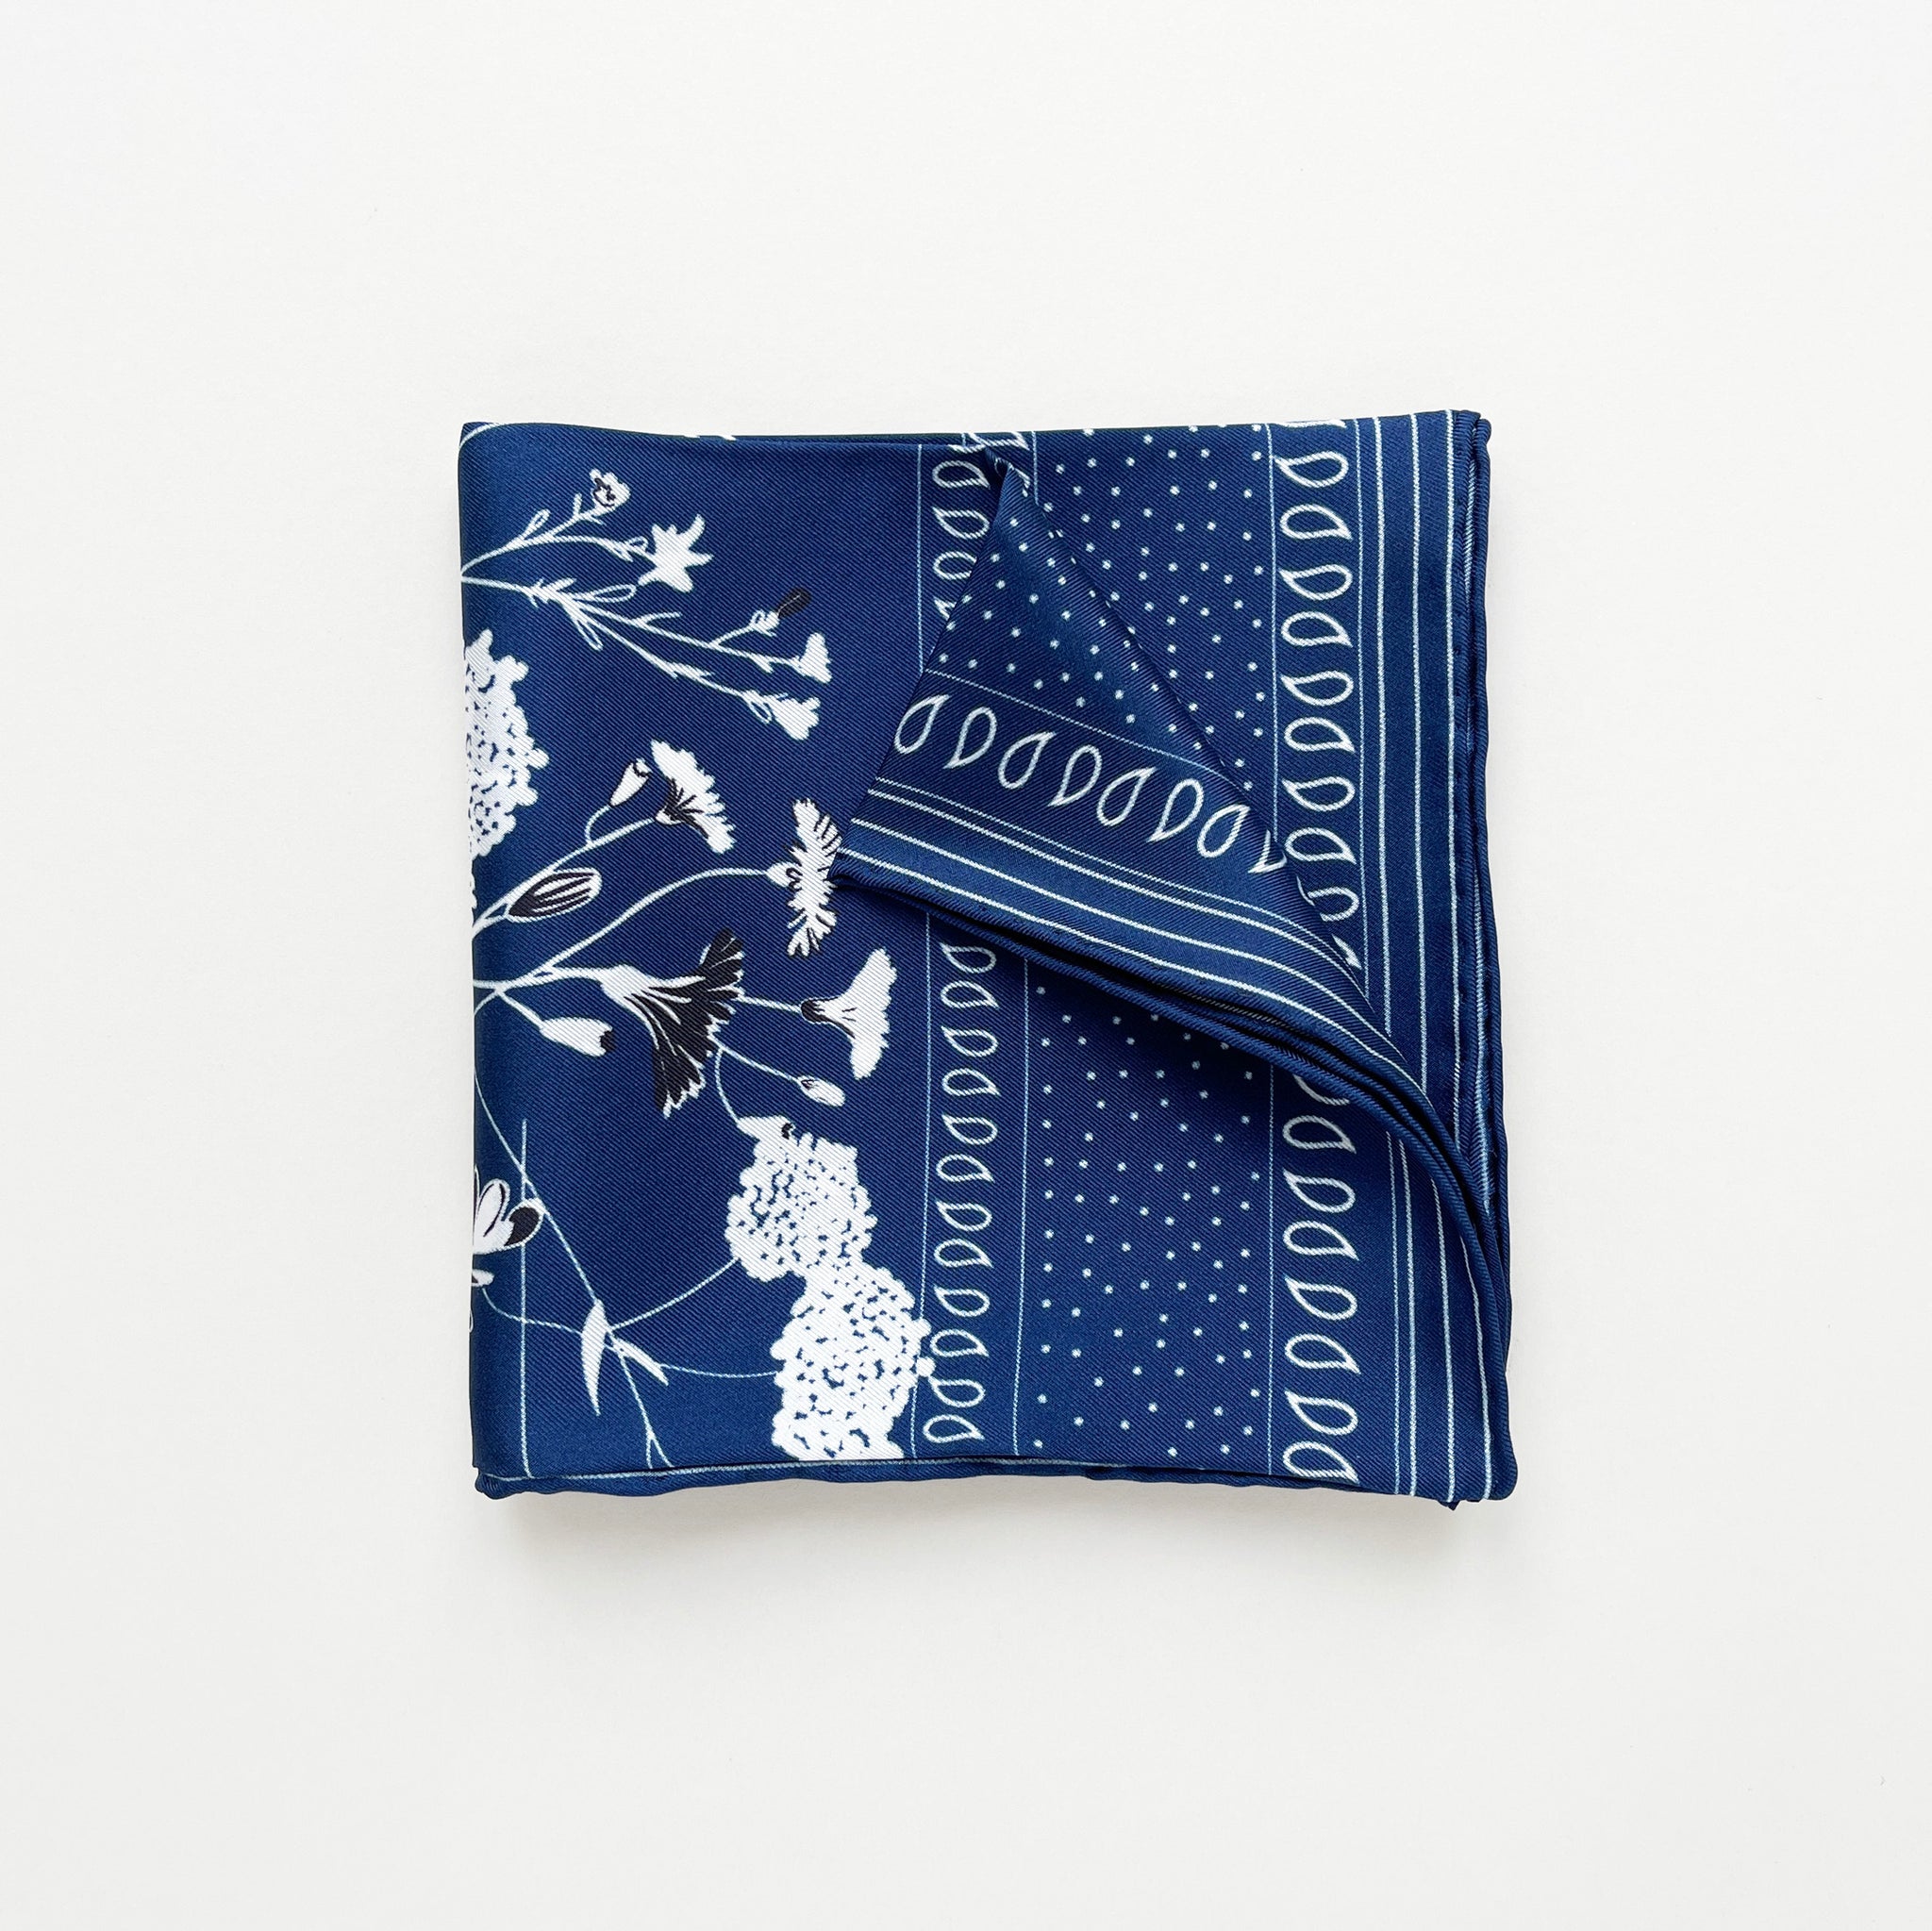 a folded rich blue silk scarf featuring botanic leafy and flower print and hand-rolled hems